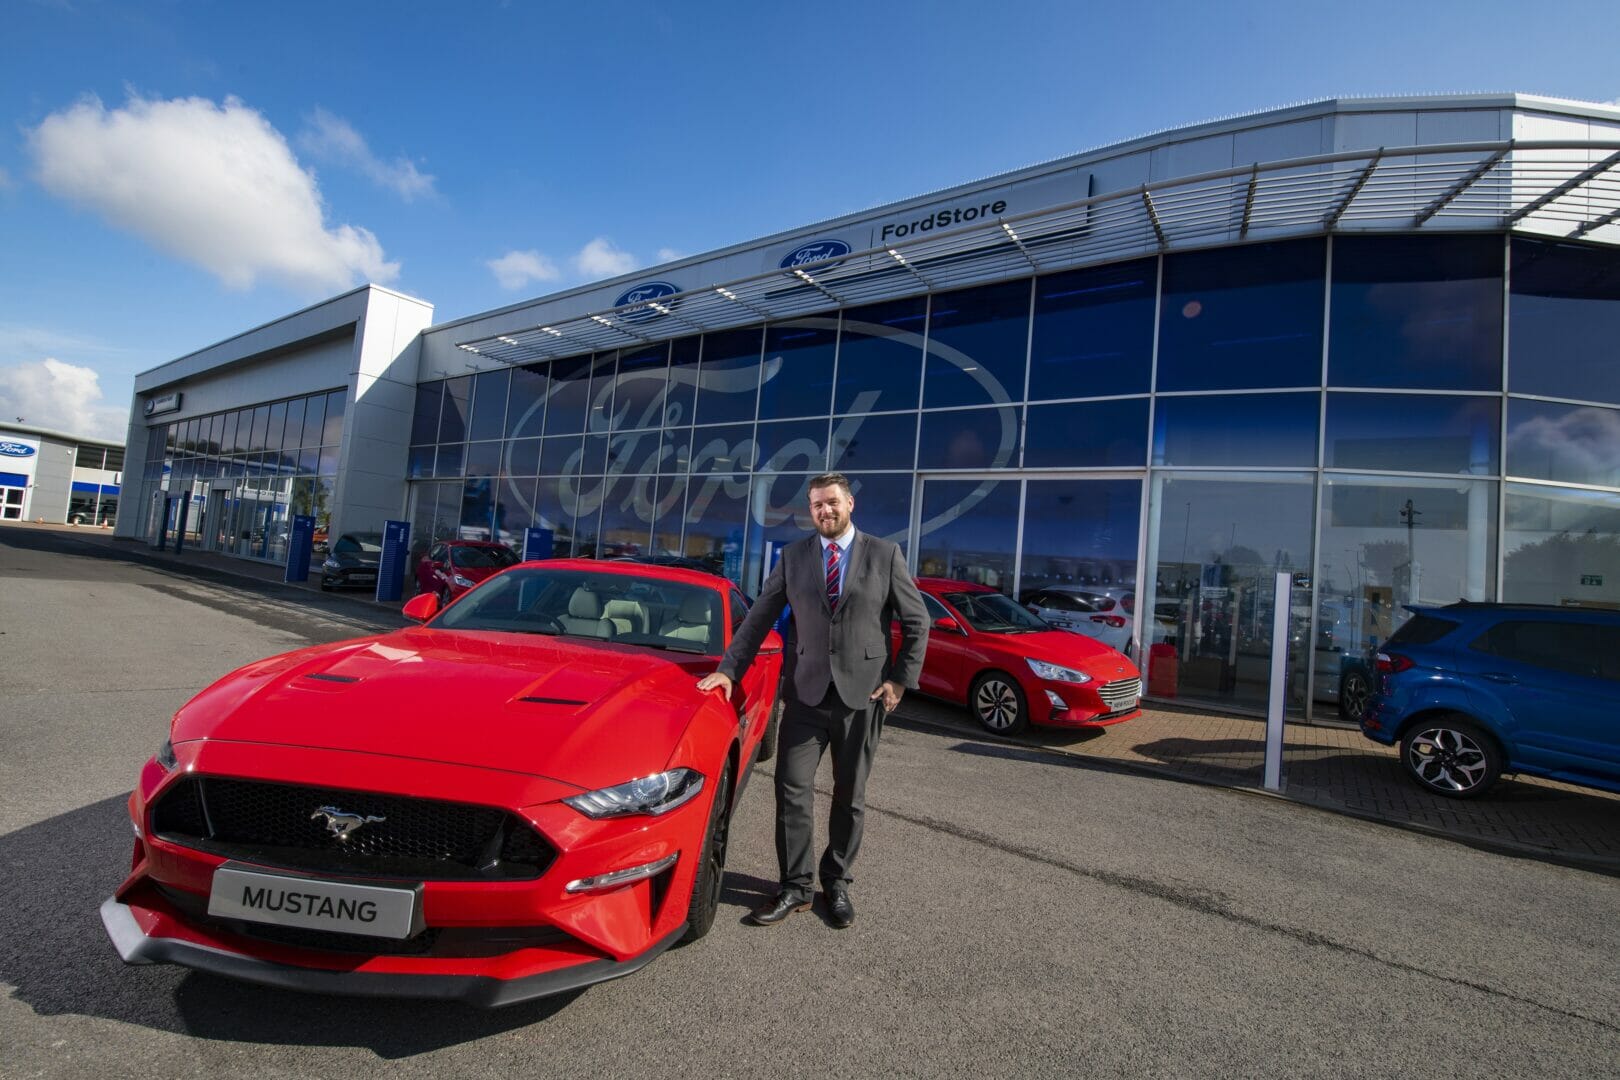 Lookers set to open doors to Teesside’s first Ford Store  @Ford